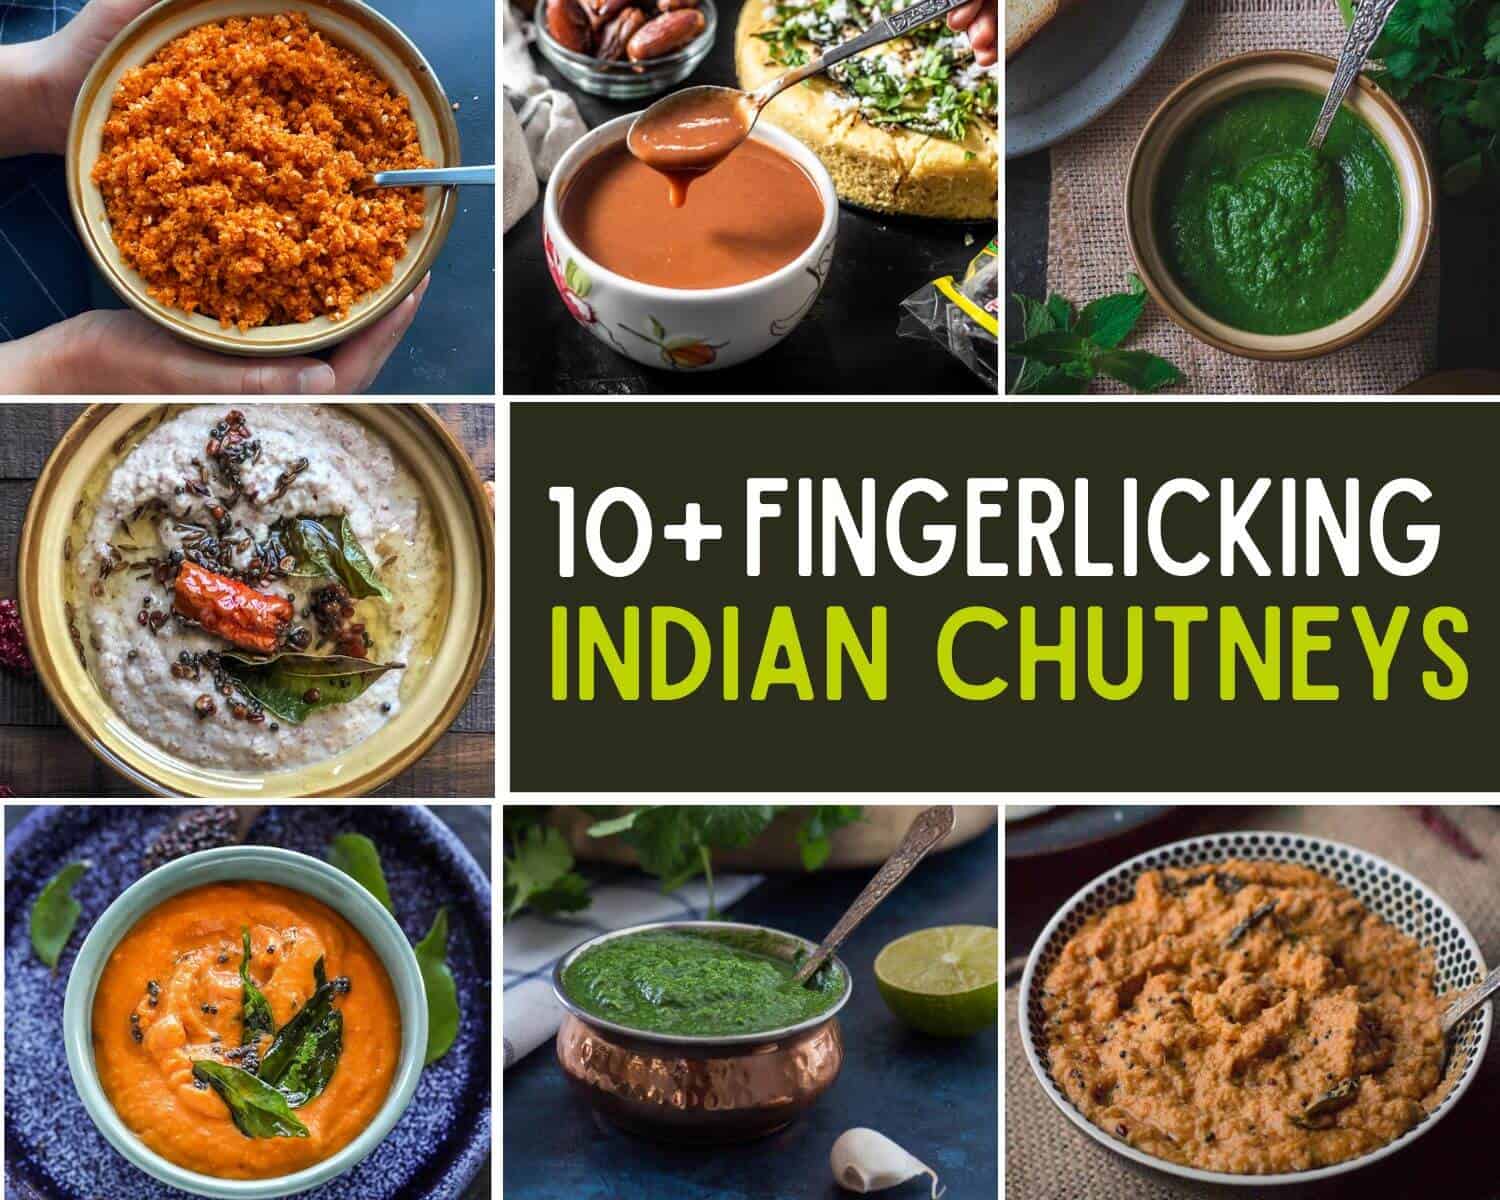 A collage of 7 images with caption 10+ Fingerlicking Indian Chutneys